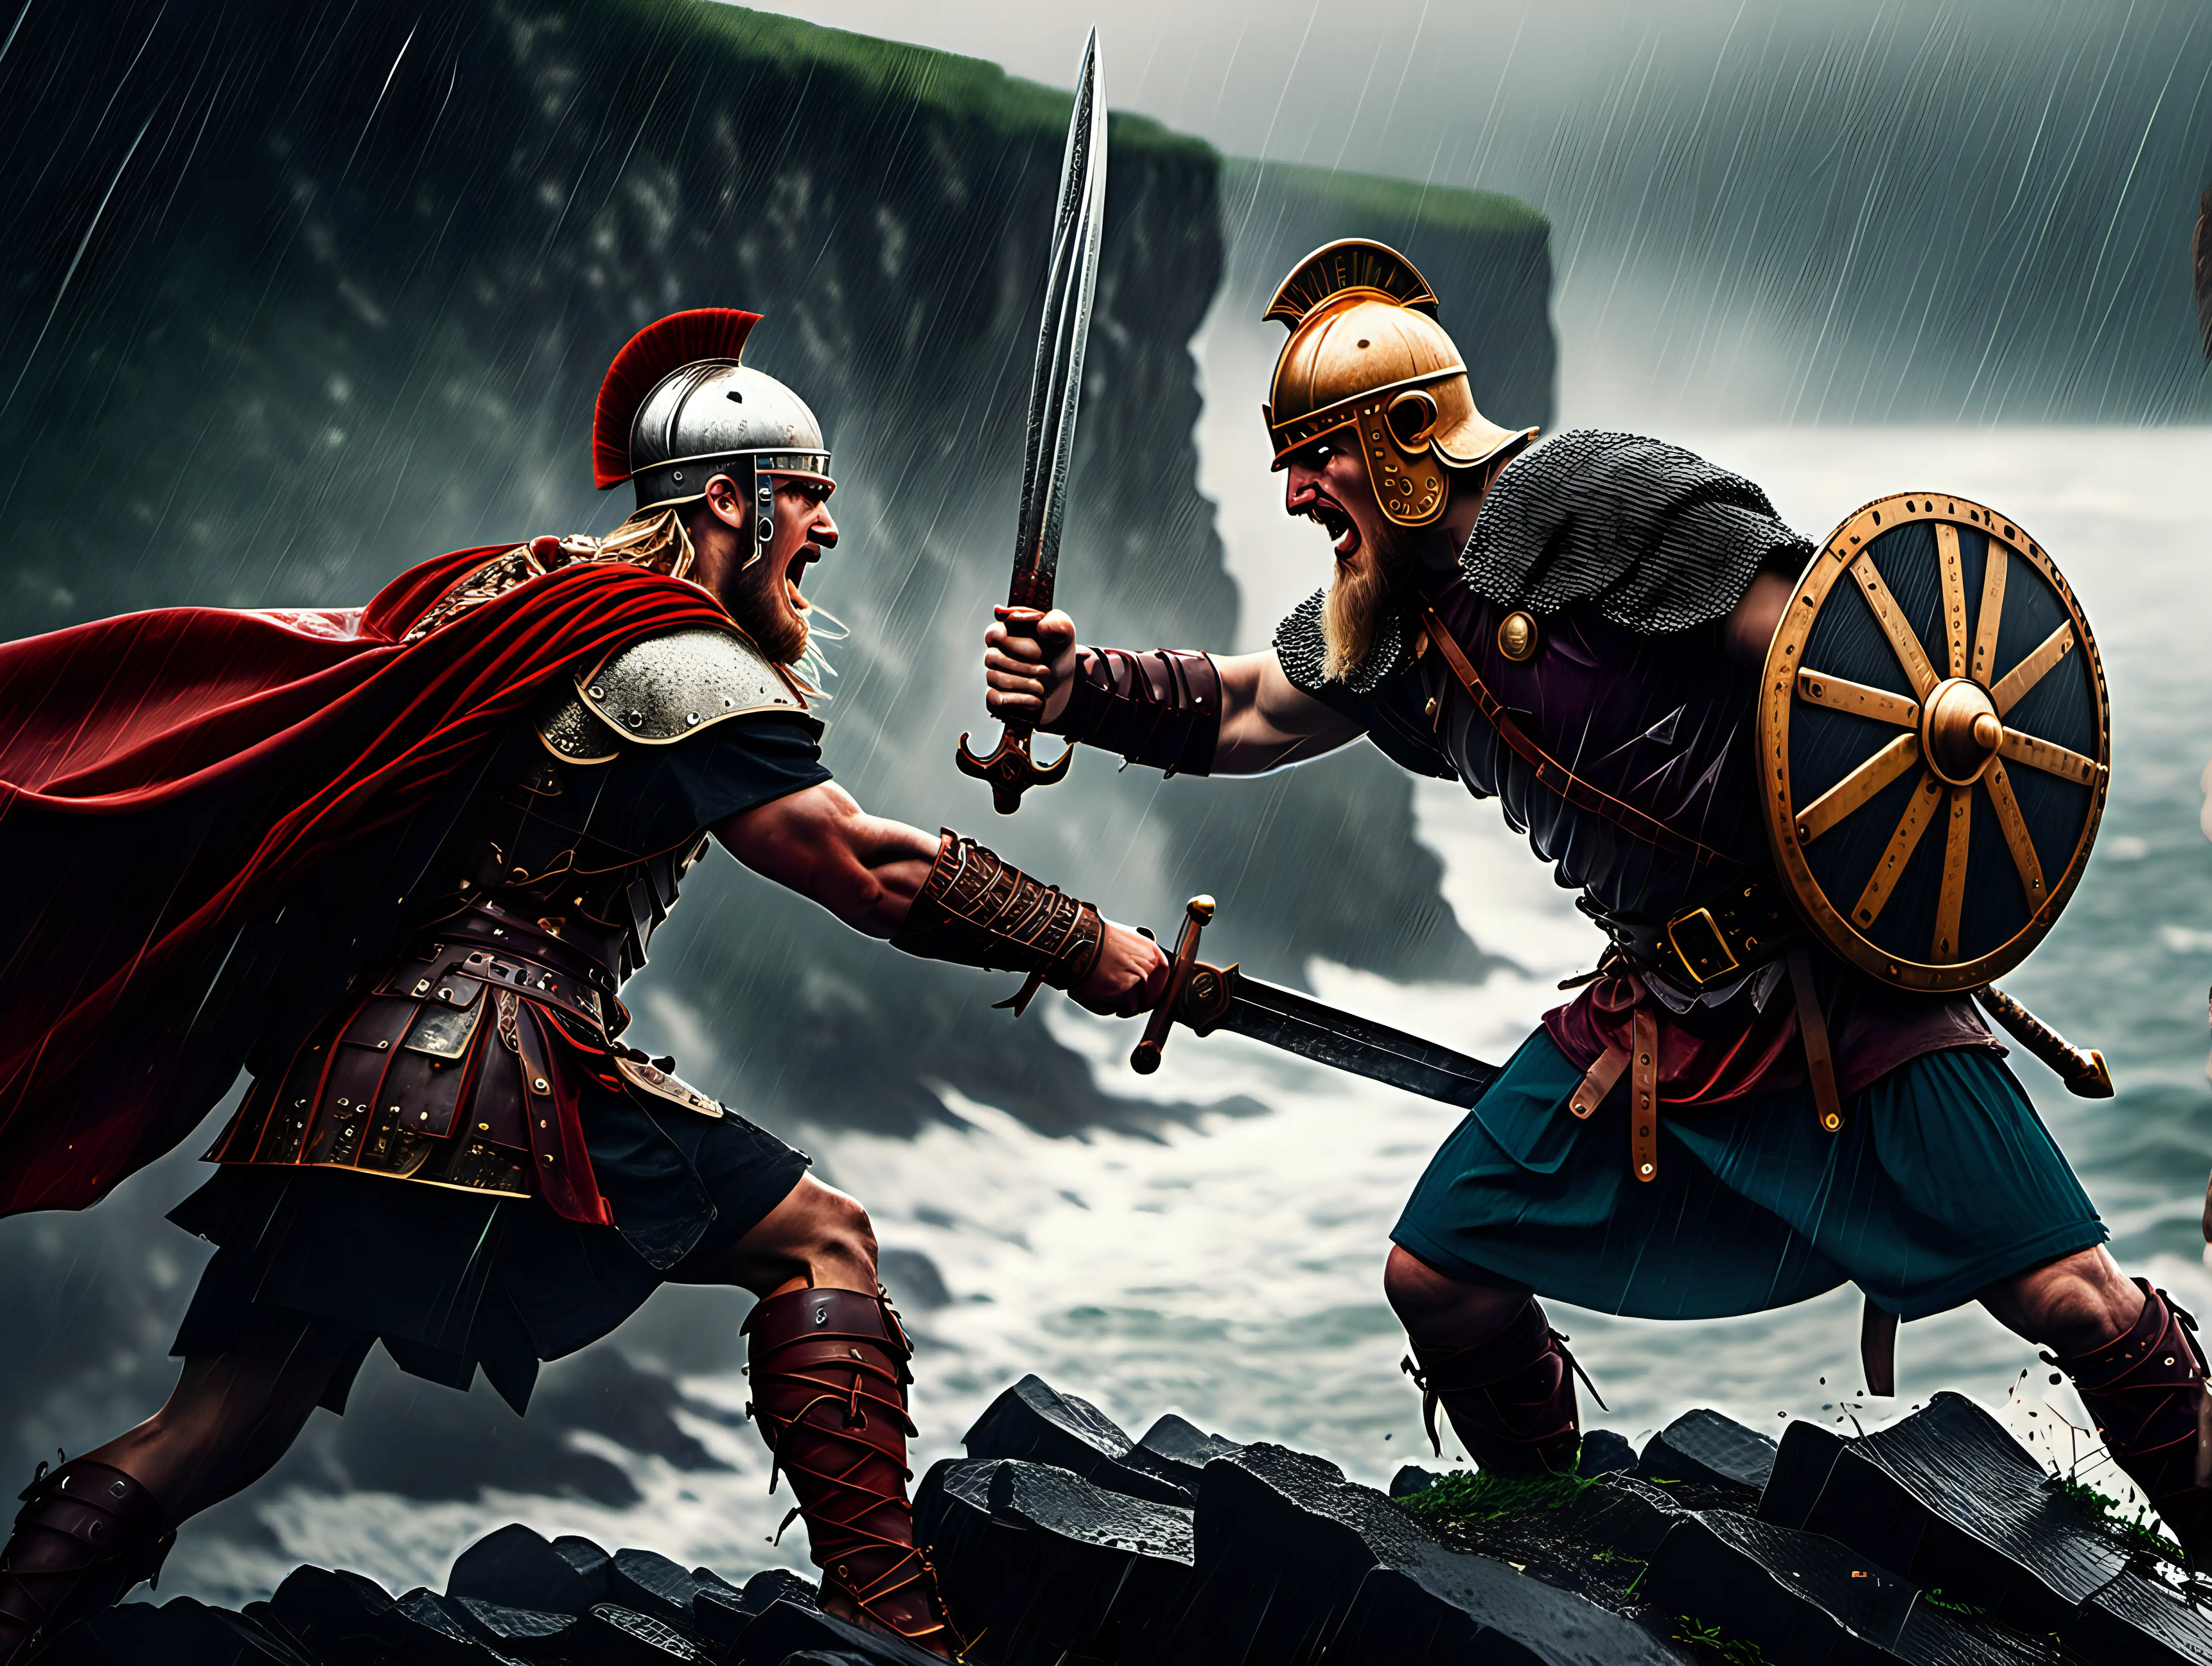 Epic Battle Roman and Viking Soldiers Clash on RainDrenched Cliff